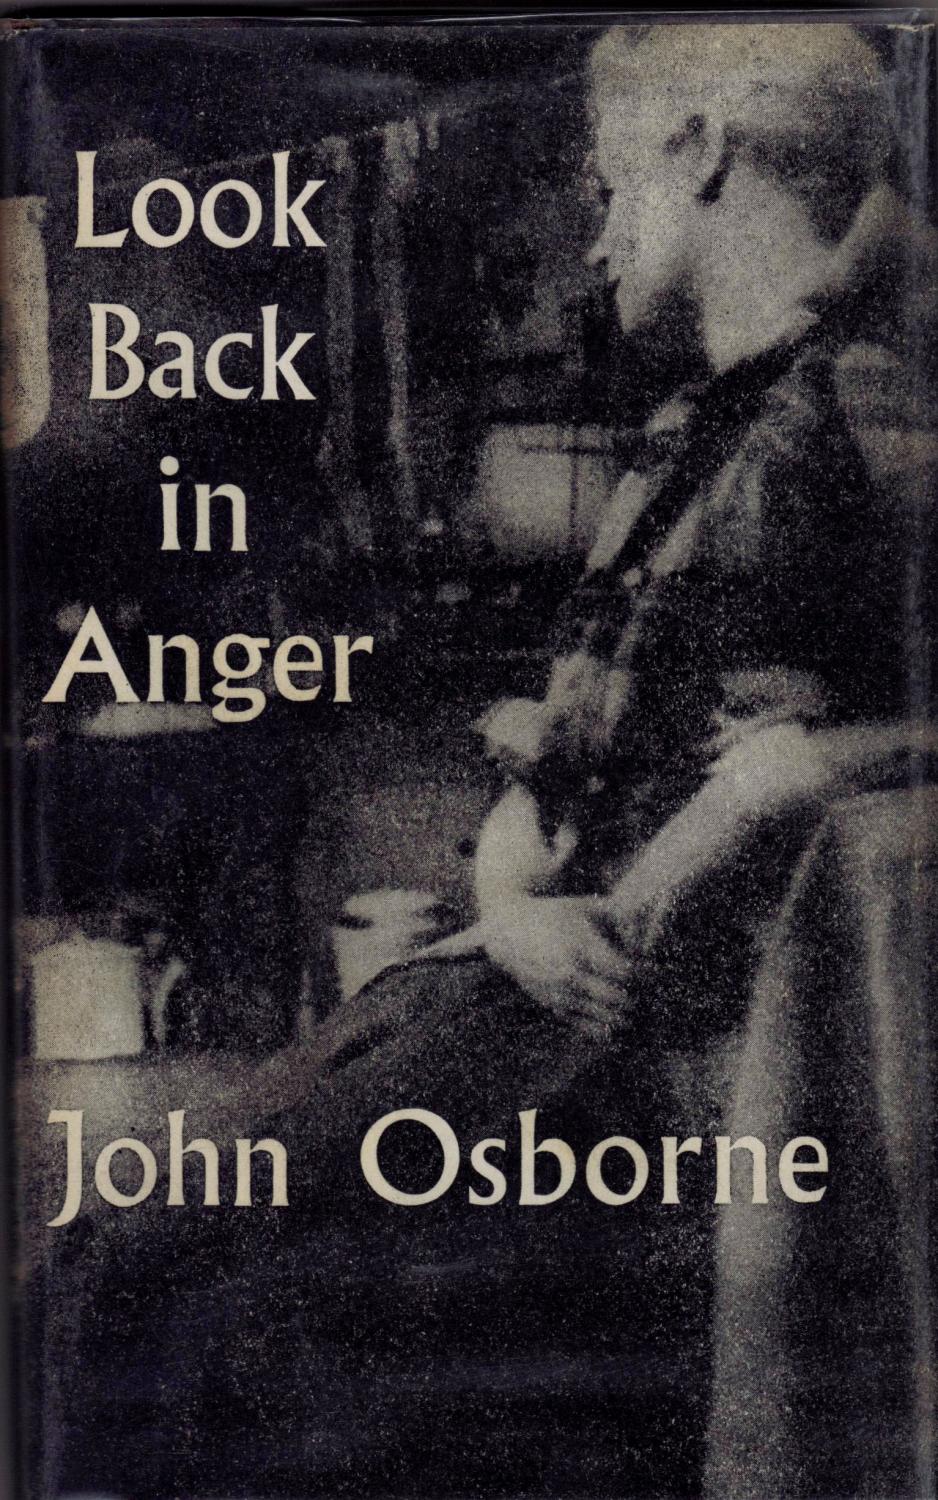 biography of the author of look back in anger